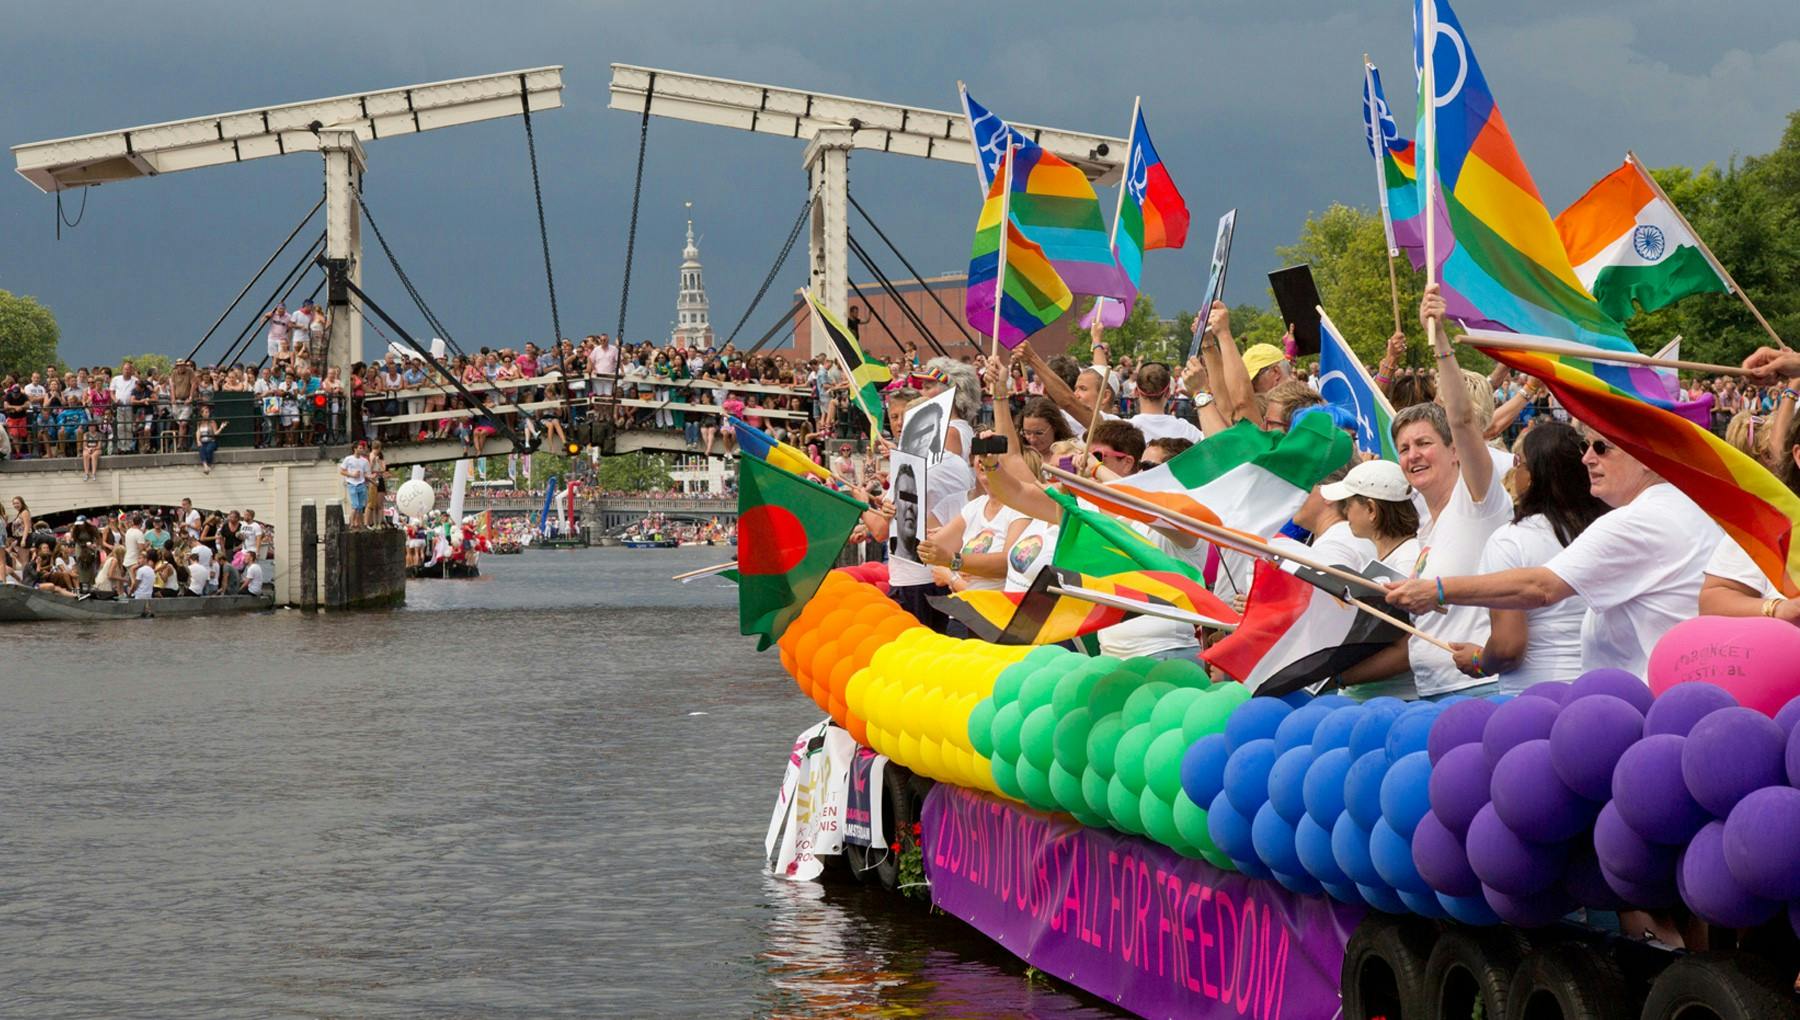 Queer & Pride Amsterdam July 3rd untill August 4th